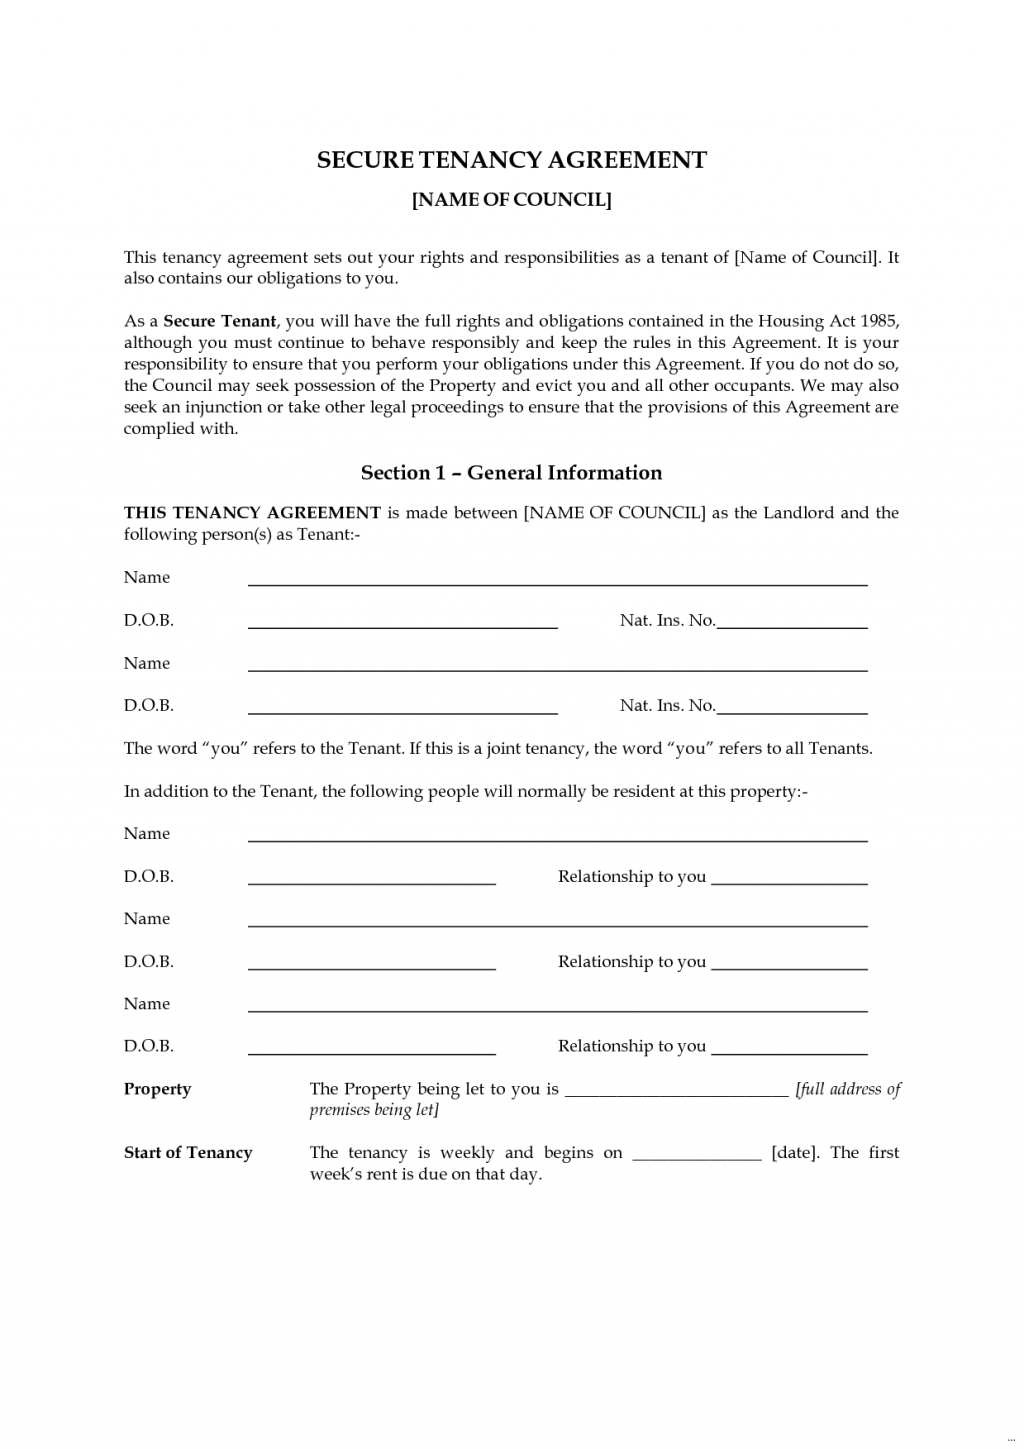 Tenancy agreement templates in word Format - Excel Template